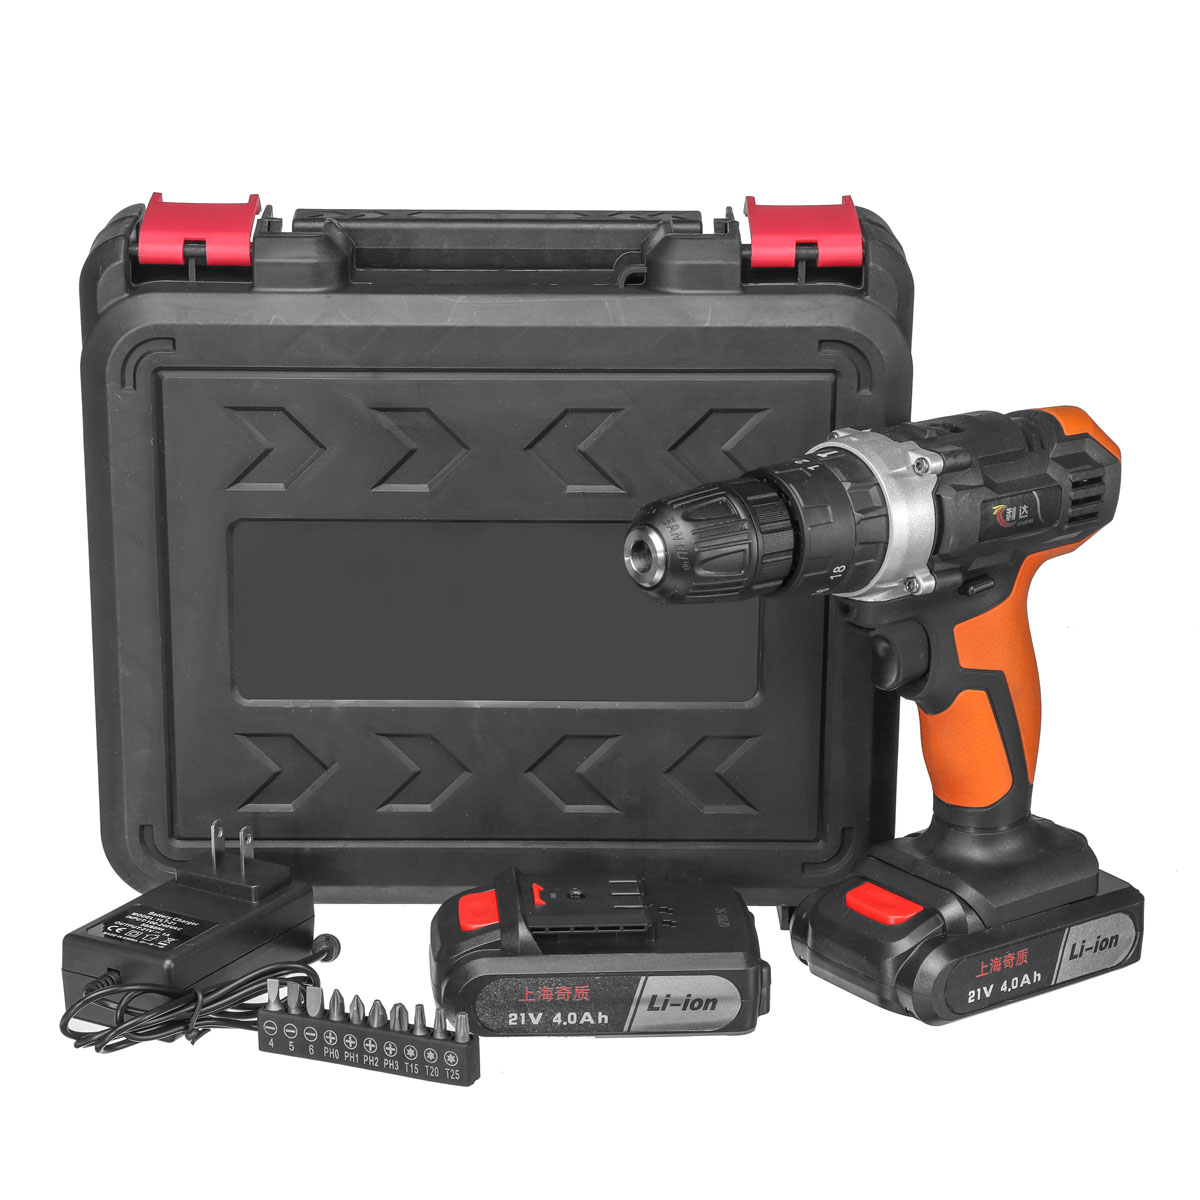 21V-4000mAh-Li-ion-Cordless-Electric-Impact-Drill-183-Clutches-2-Speed-Power-Drills-With-2-Batteries-1412172-2